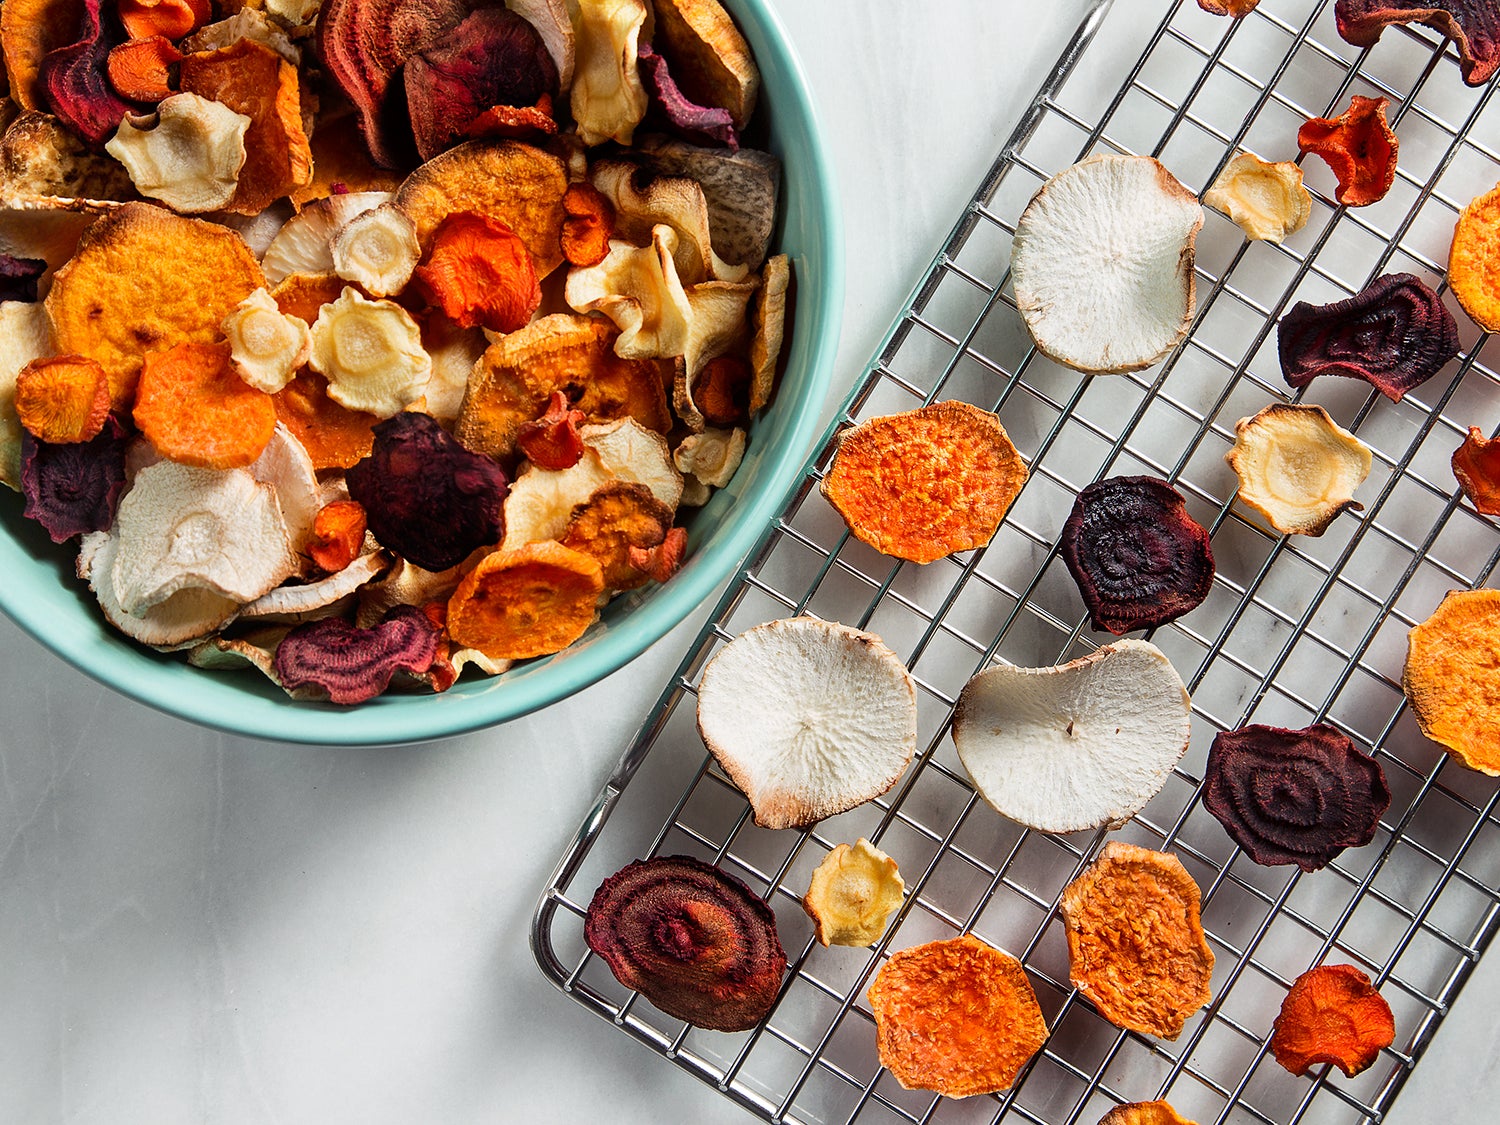 5 Things You Need to Know About Veggie Chips